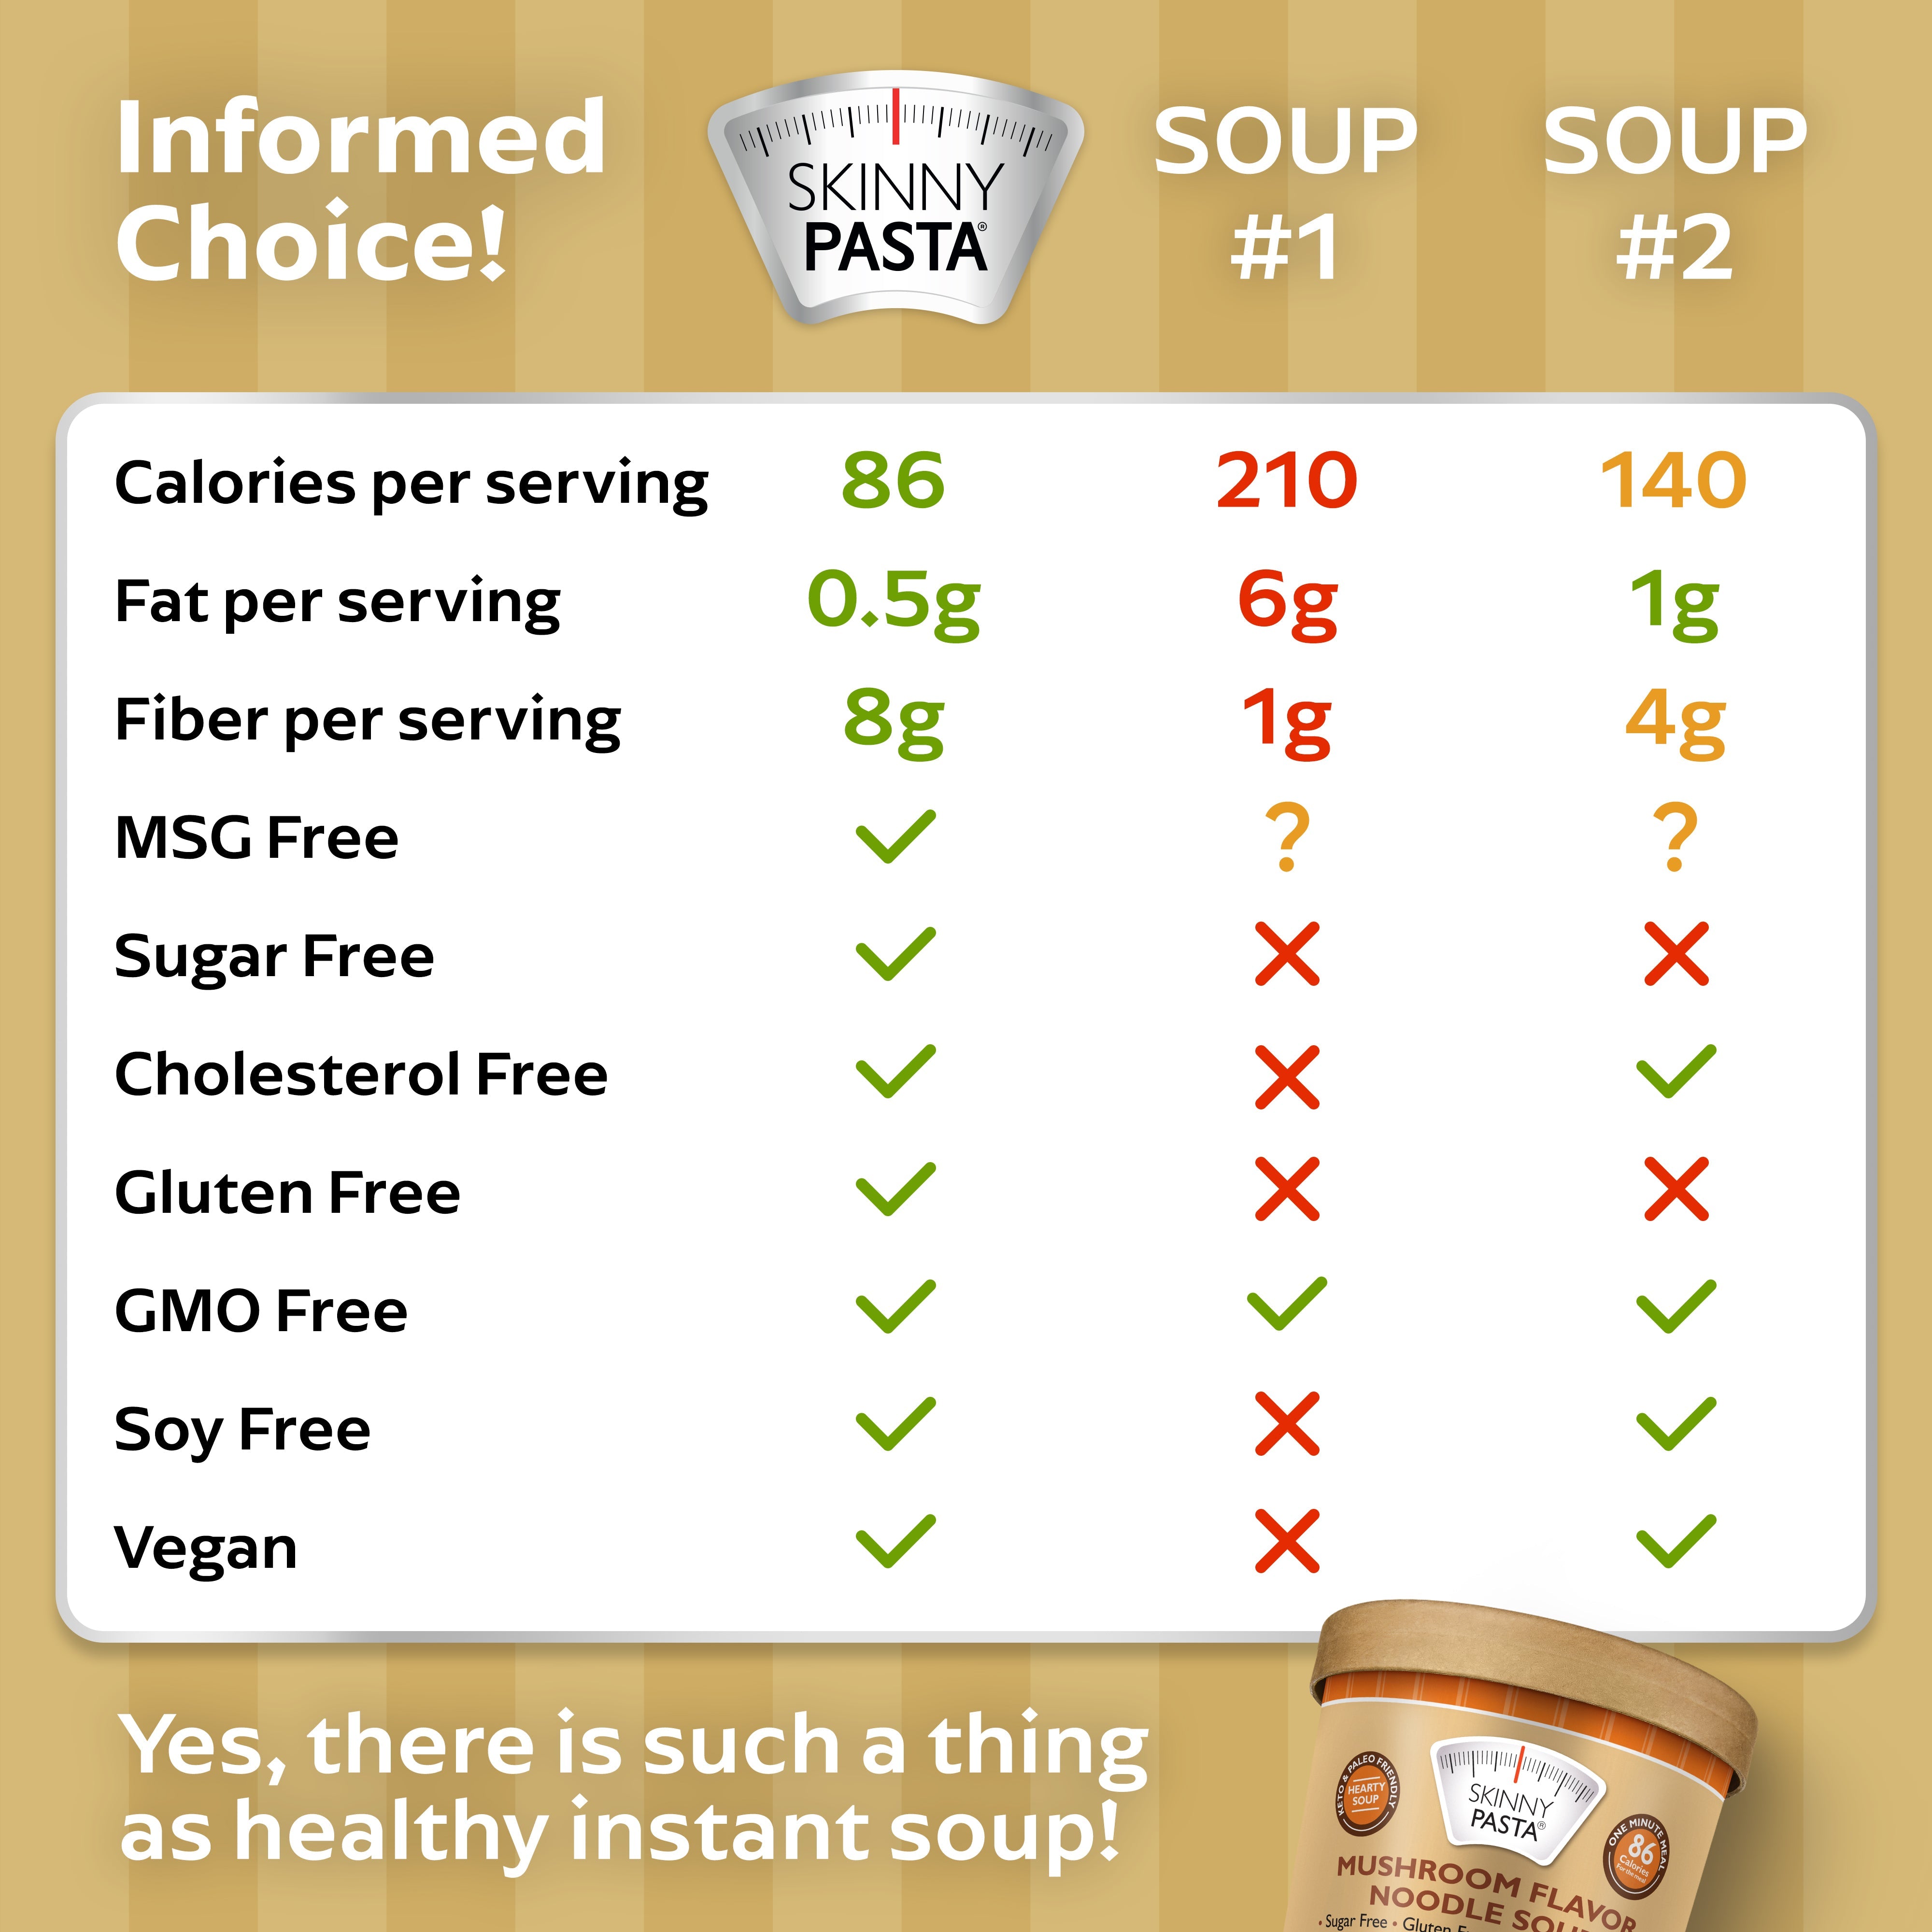 Skinny Soup Mushroom Flavor - 24 Pack: Instant, Low-Calorie, Ready-to-Eat Noodles